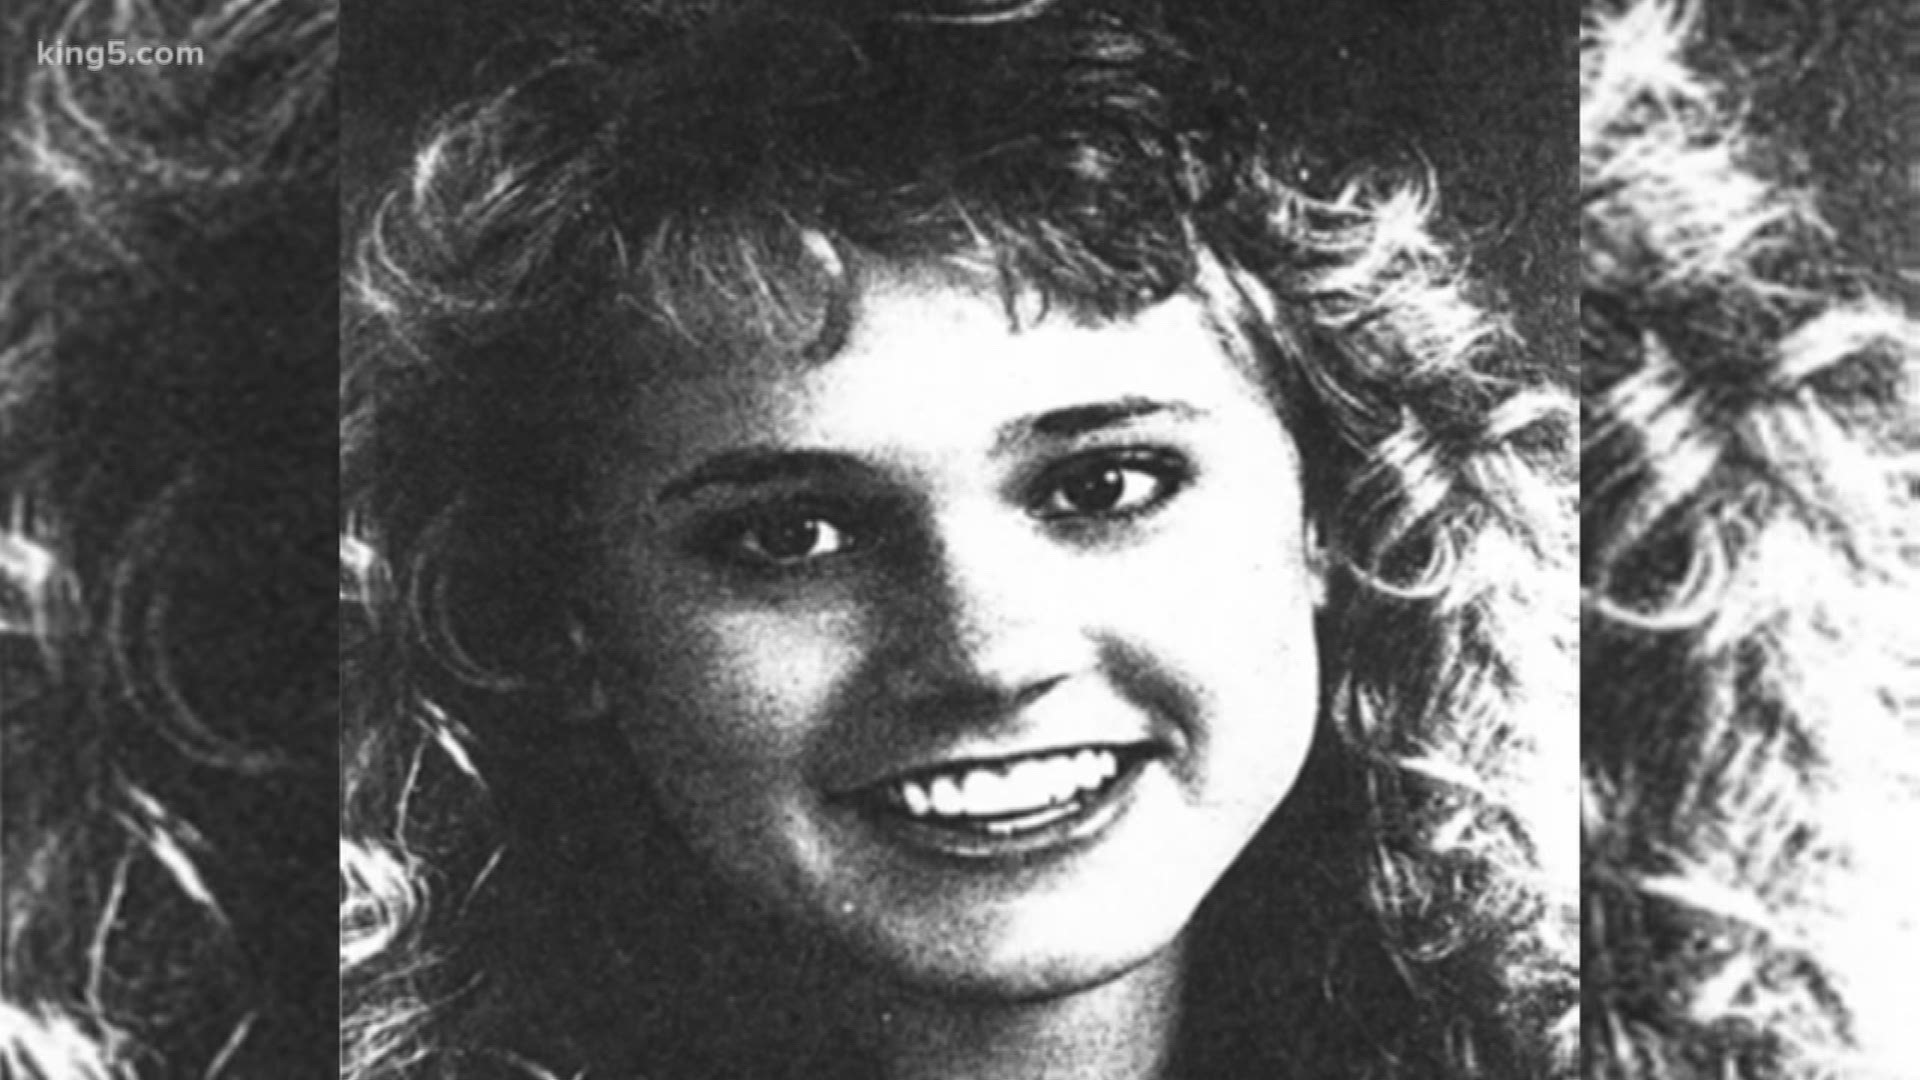 Intriguing new developments in the trial of accused cold case killer Timothy Bass. The veteran medical examiner who worked on the case nearly 30 years ago has had a change of heart as to how 18-year-old Mandy Stavik died. KING 5's Eric Wilkinson reports.